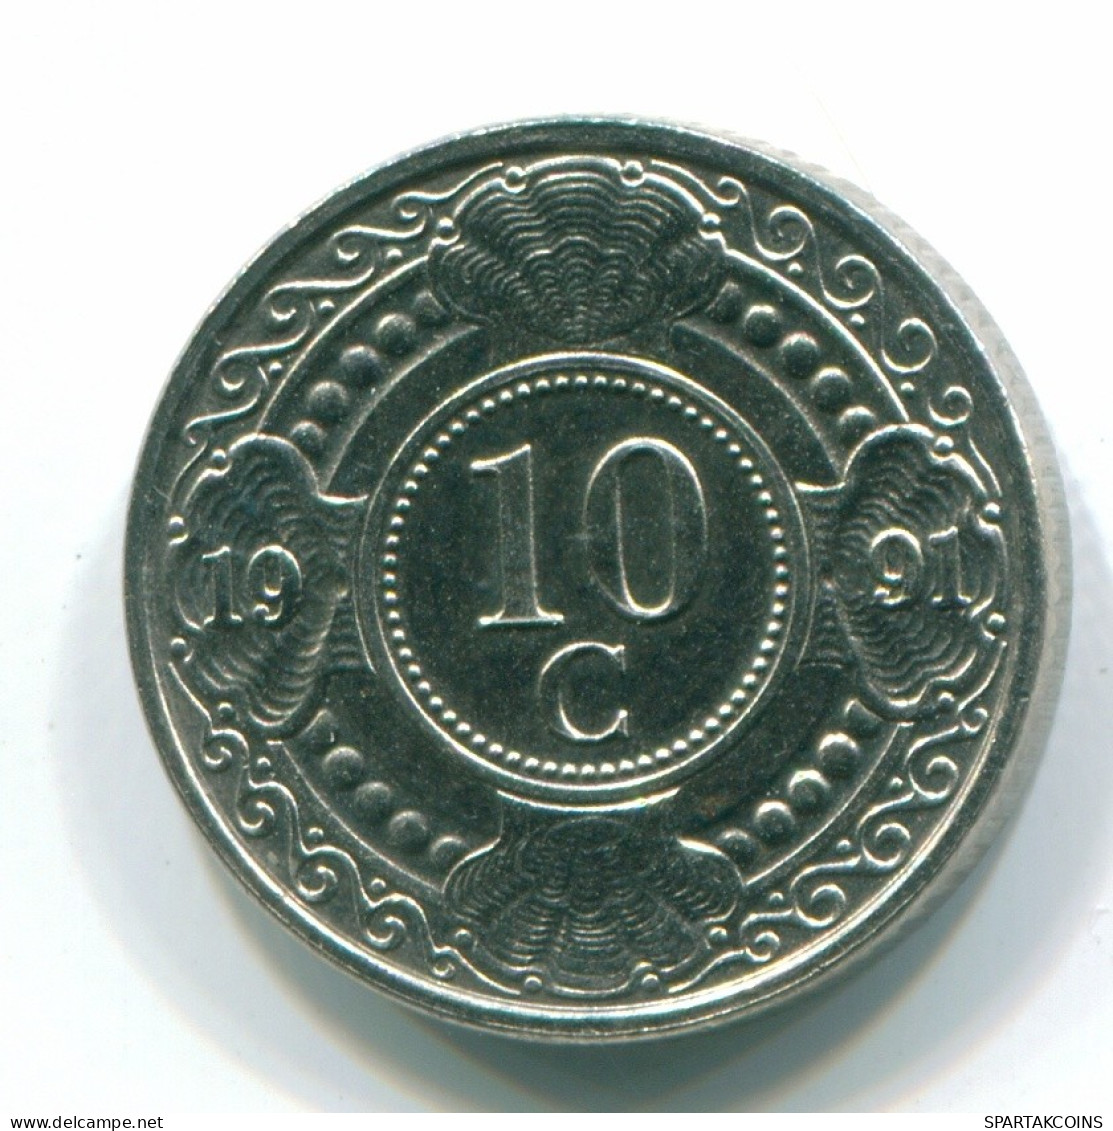 10 CENTS 1991 NETHERLANDS ANTILLES Nickel Colonial Coin #S11320.U.A - Netherlands Antilles